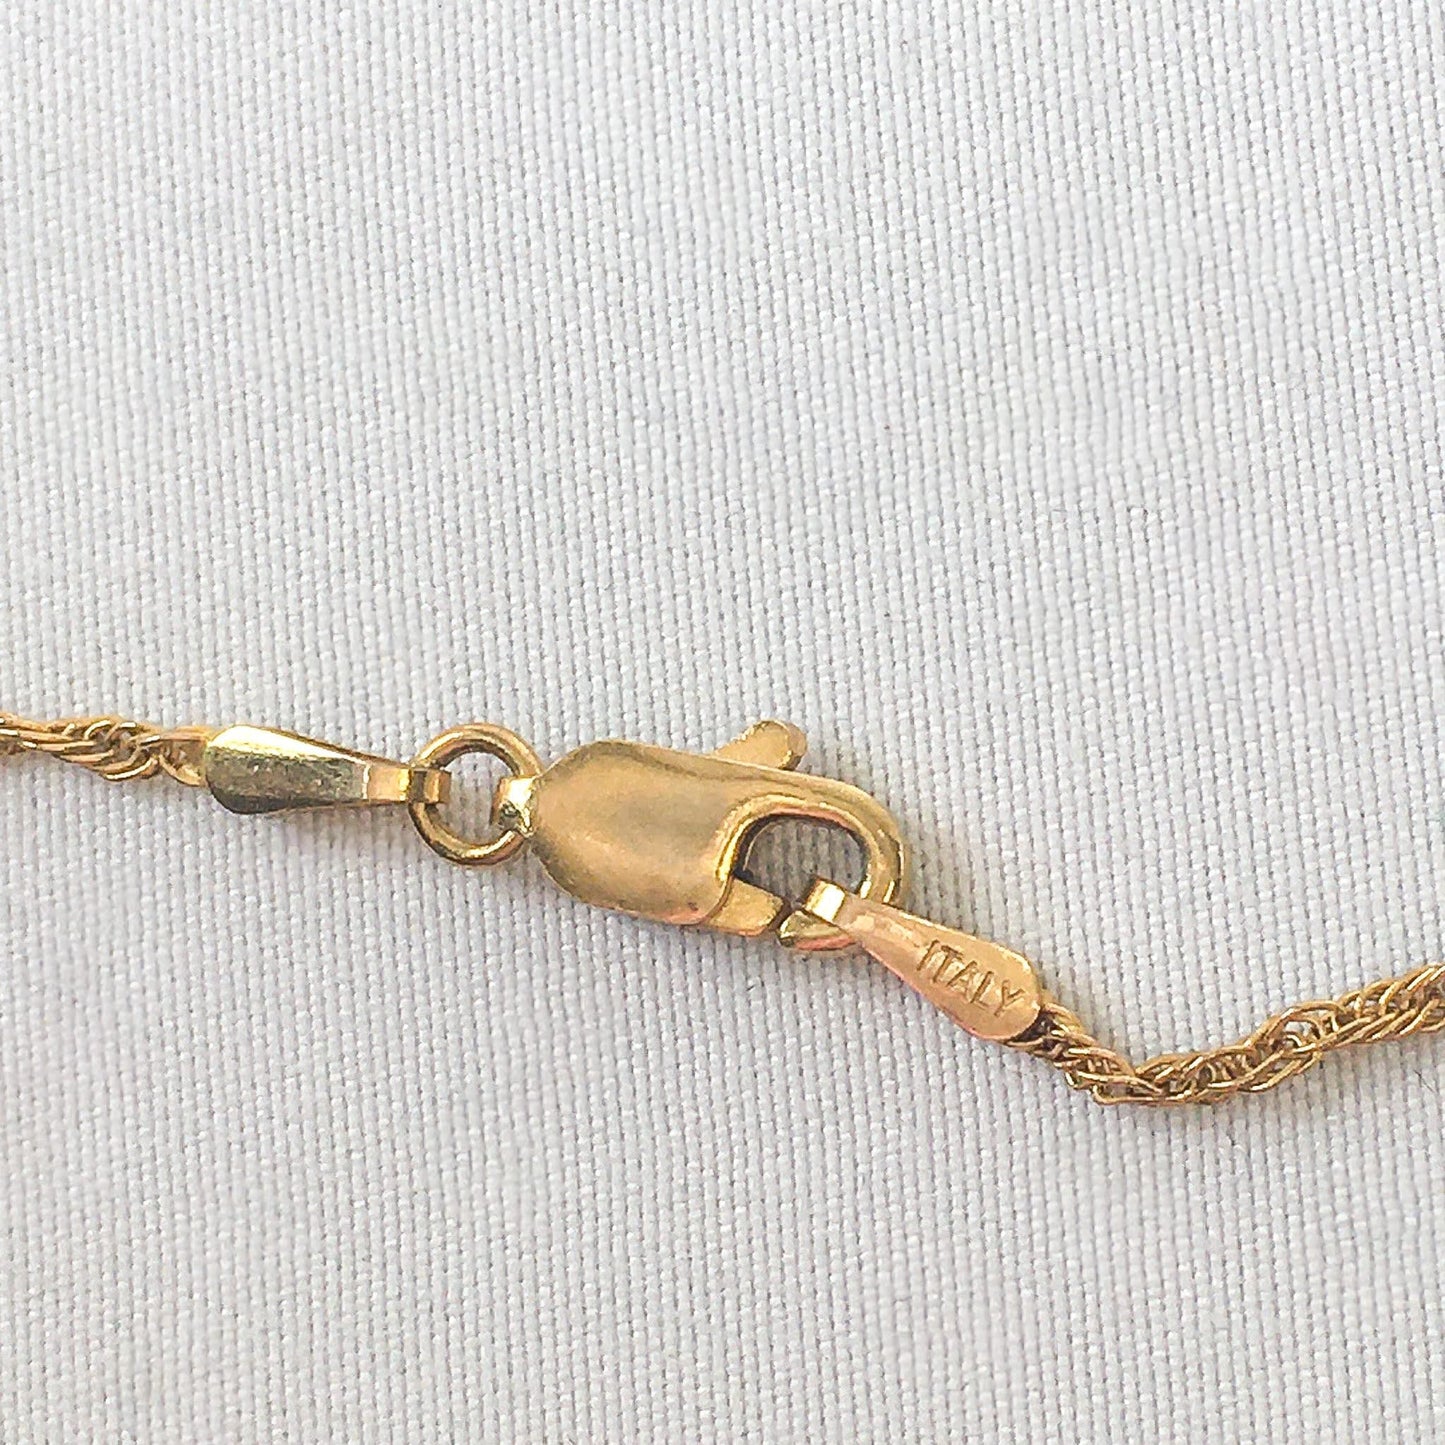 Vintage 14k Gold Cross on 14k Gold Chain, Abstract Cross, Unidentified Makers Mark